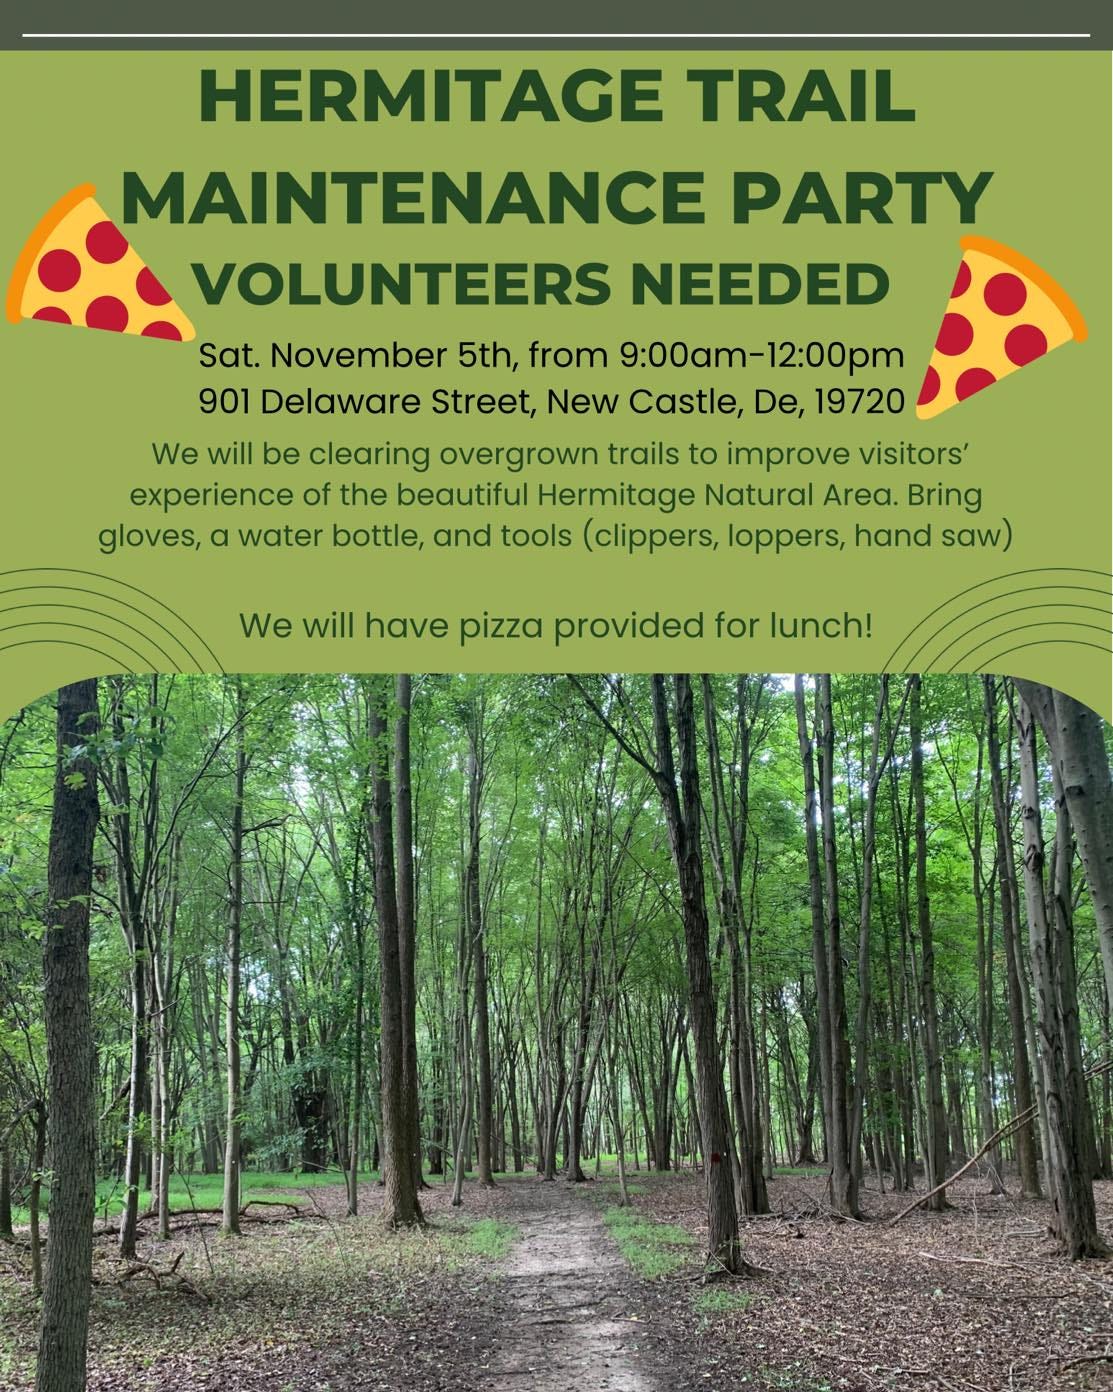 May be an image of pizza, outdoors and text that says 'HERMITAGE TRAIL MAINTENANCE PARTY VOLUNTEERS NEEDED Sat. November 5th, from 9:00am-12:00pm 901 Delaware Street, New Castle, De, 19720 We will be clearing overgrown trails to improve visitors' experience of the beautiful Hermitage Natural Area. Bring gloves,a water bottle, and tools (clippers, loppers, hand saw) We will have pizza provided for lunch!'